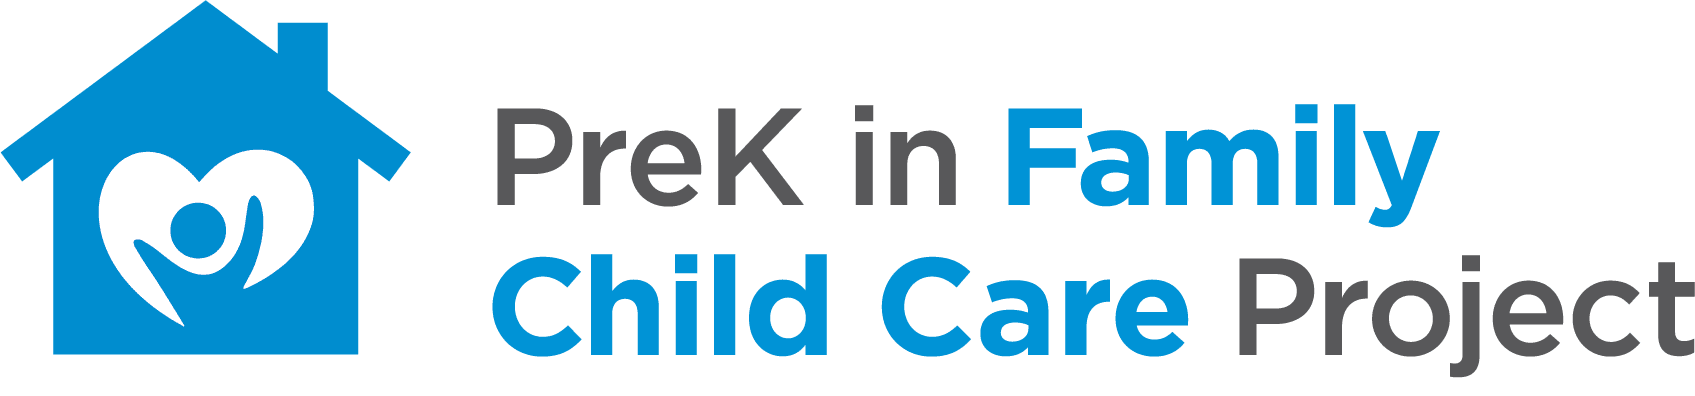 PreK in Family Child Care Project